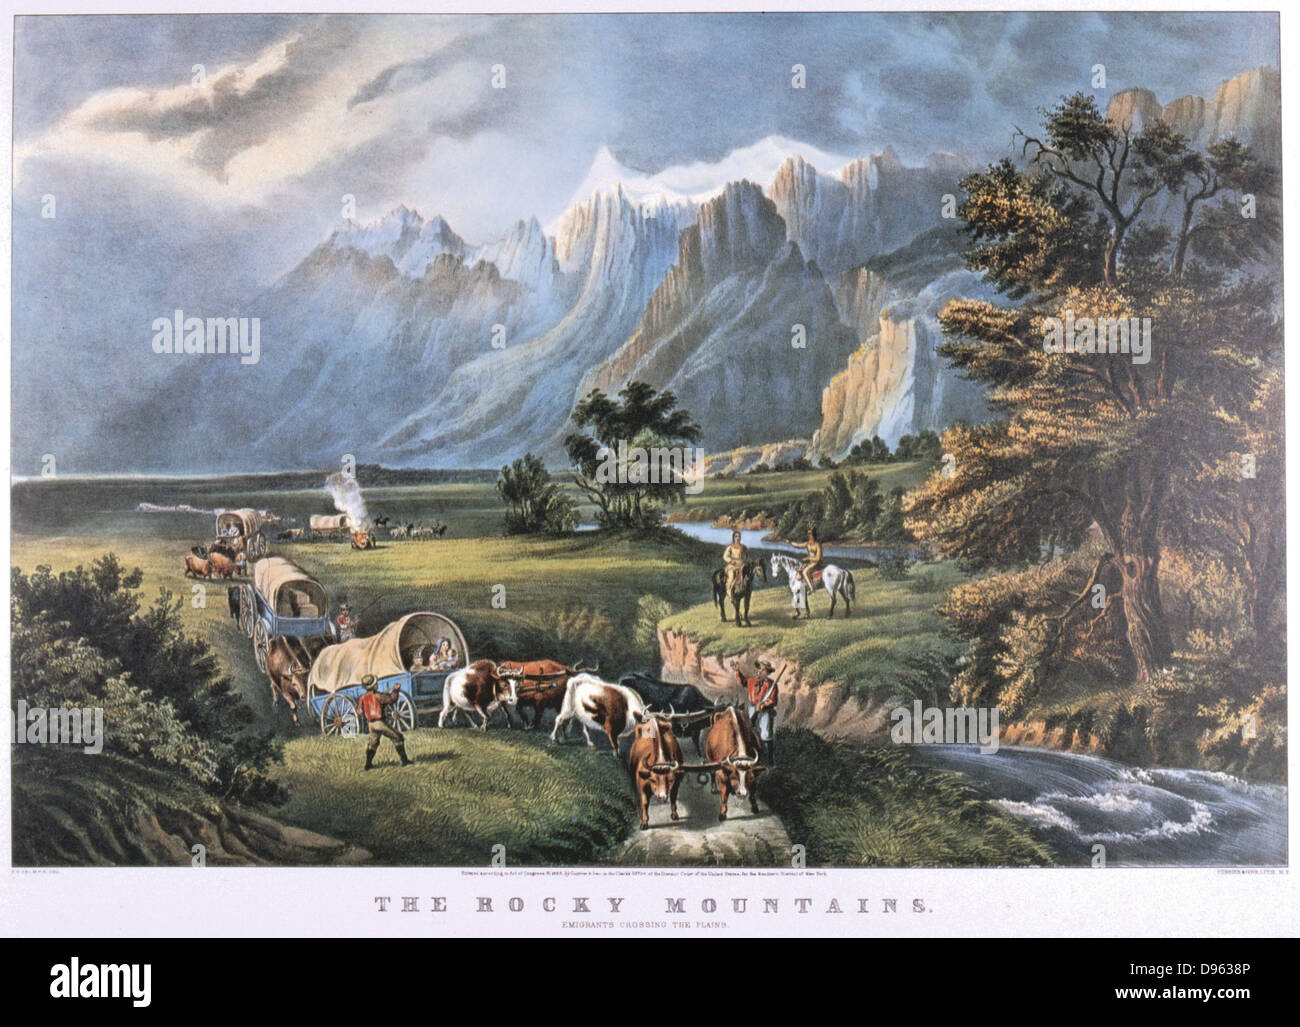 The Rocky Mountains. Emigrants in covered wagons crossing the Plains watched by Native Americans.  Lithograph by Currier and Ives, New York, c1870. Stock Photo